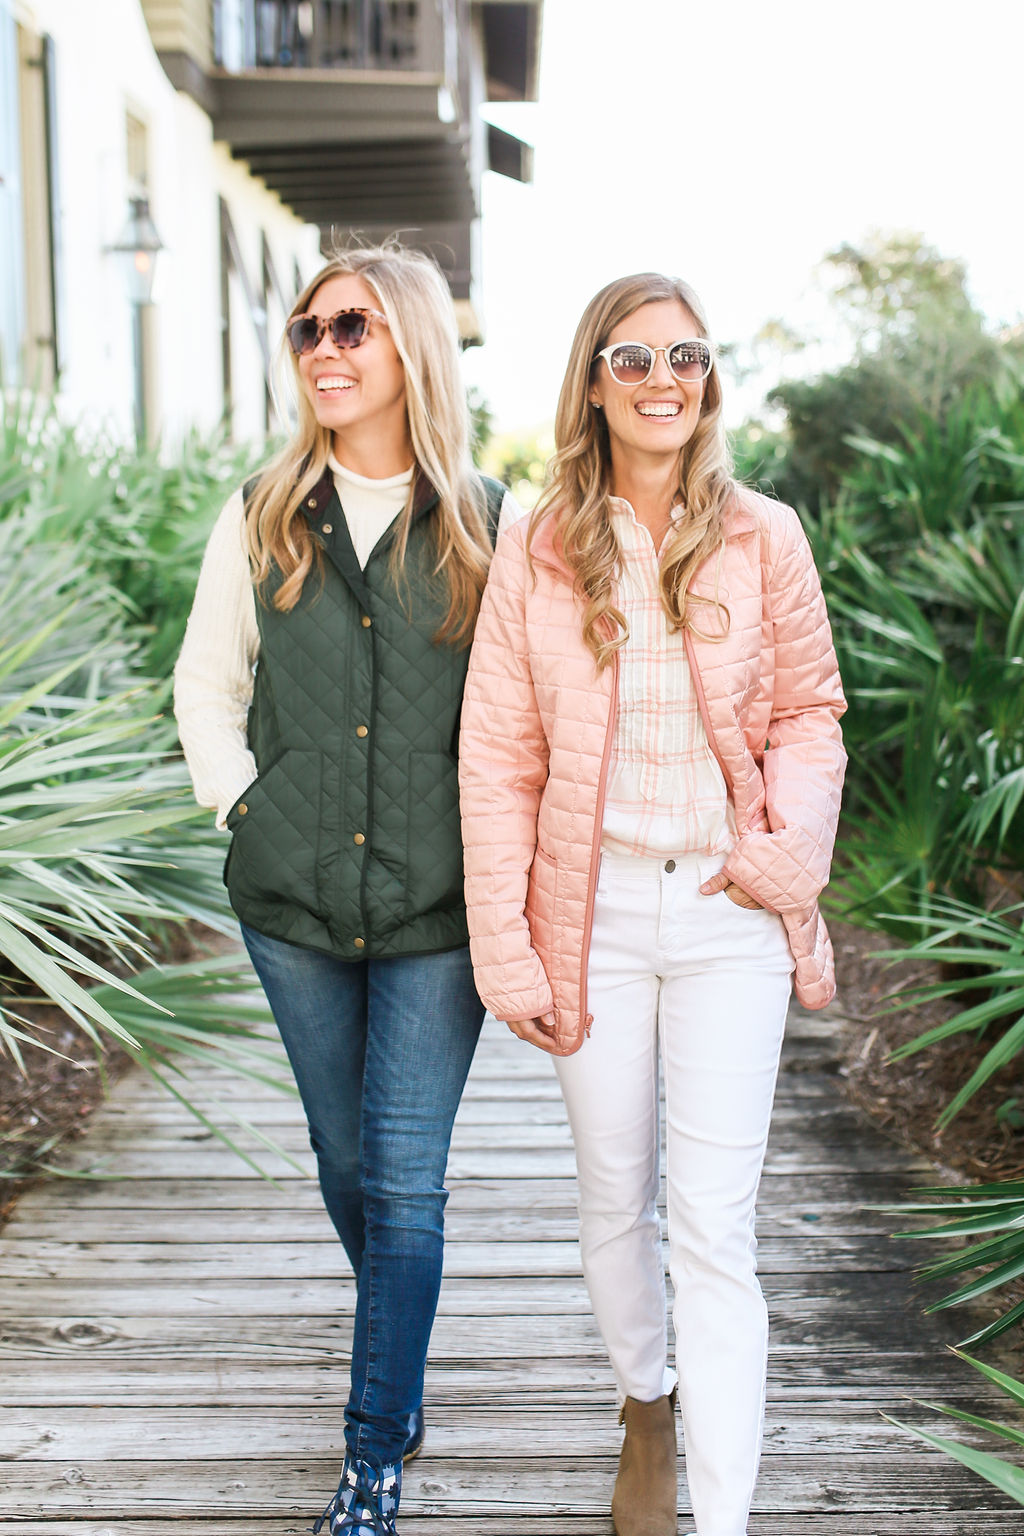 Travel: Palm Beach Lately's Guide to Rosemary Beach